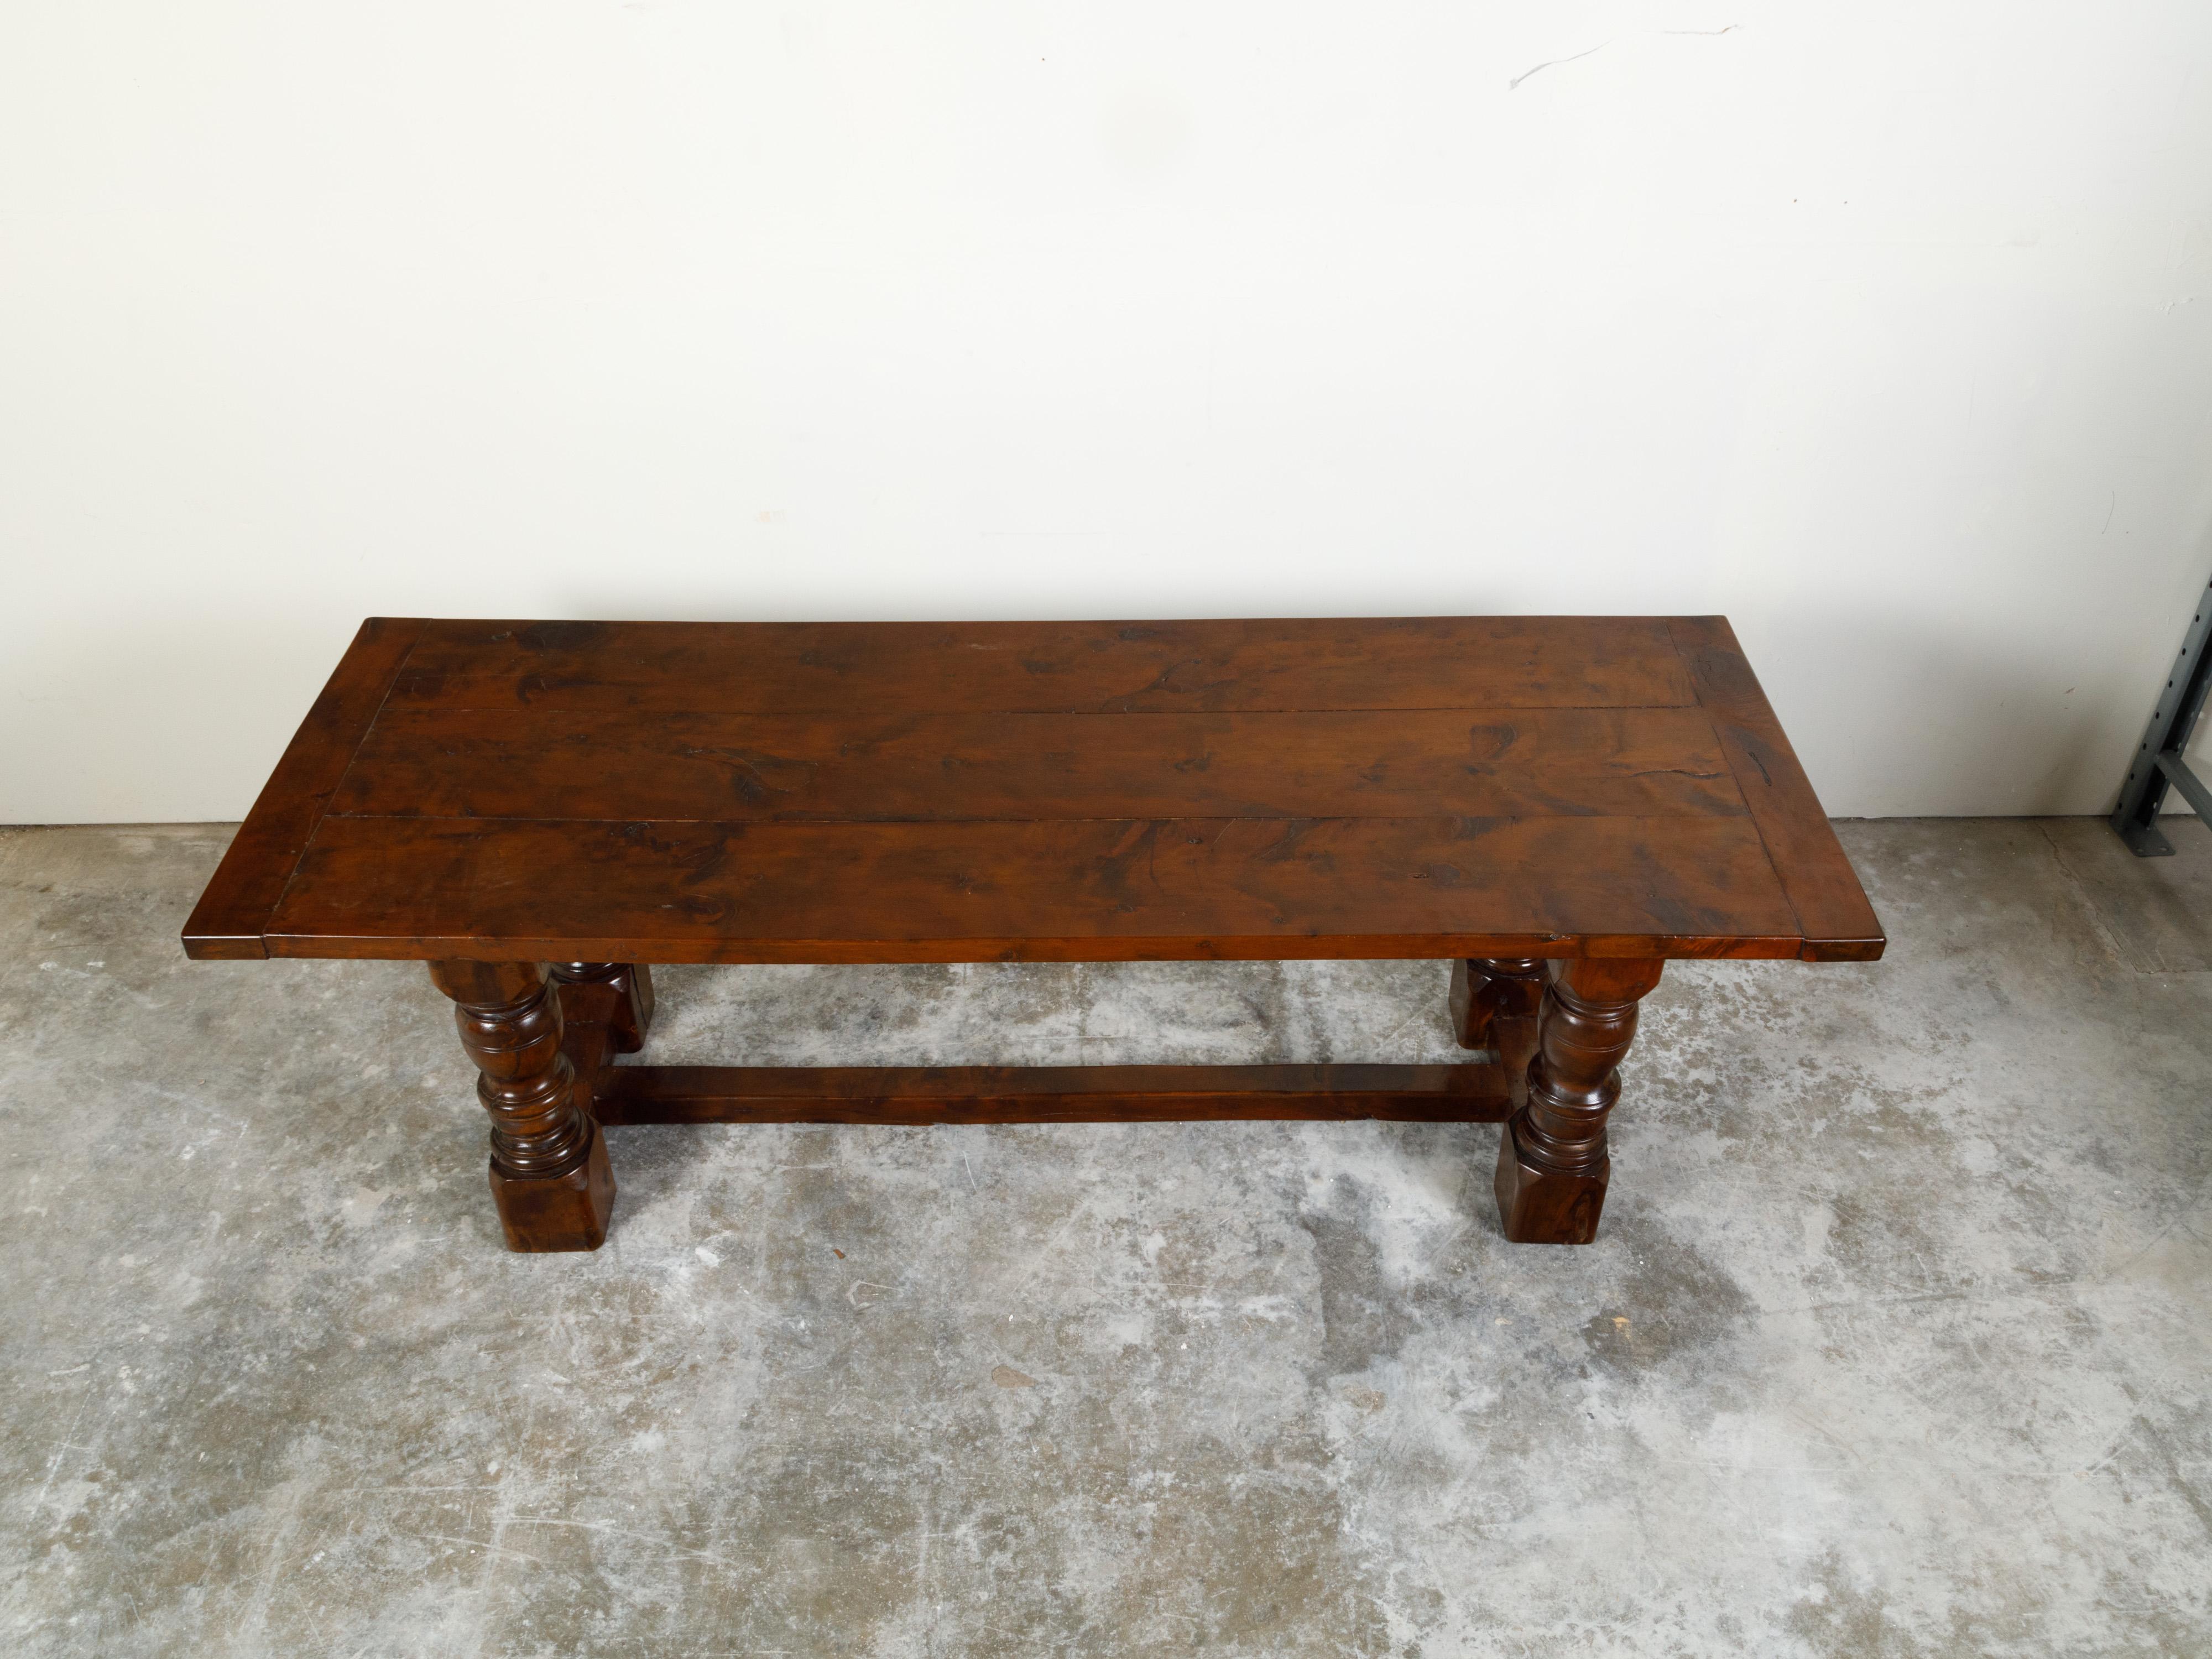 English 19th Century Walnut Dining Table with Turned Legs and H-Form Stretcher In Good Condition For Sale In Atlanta, GA